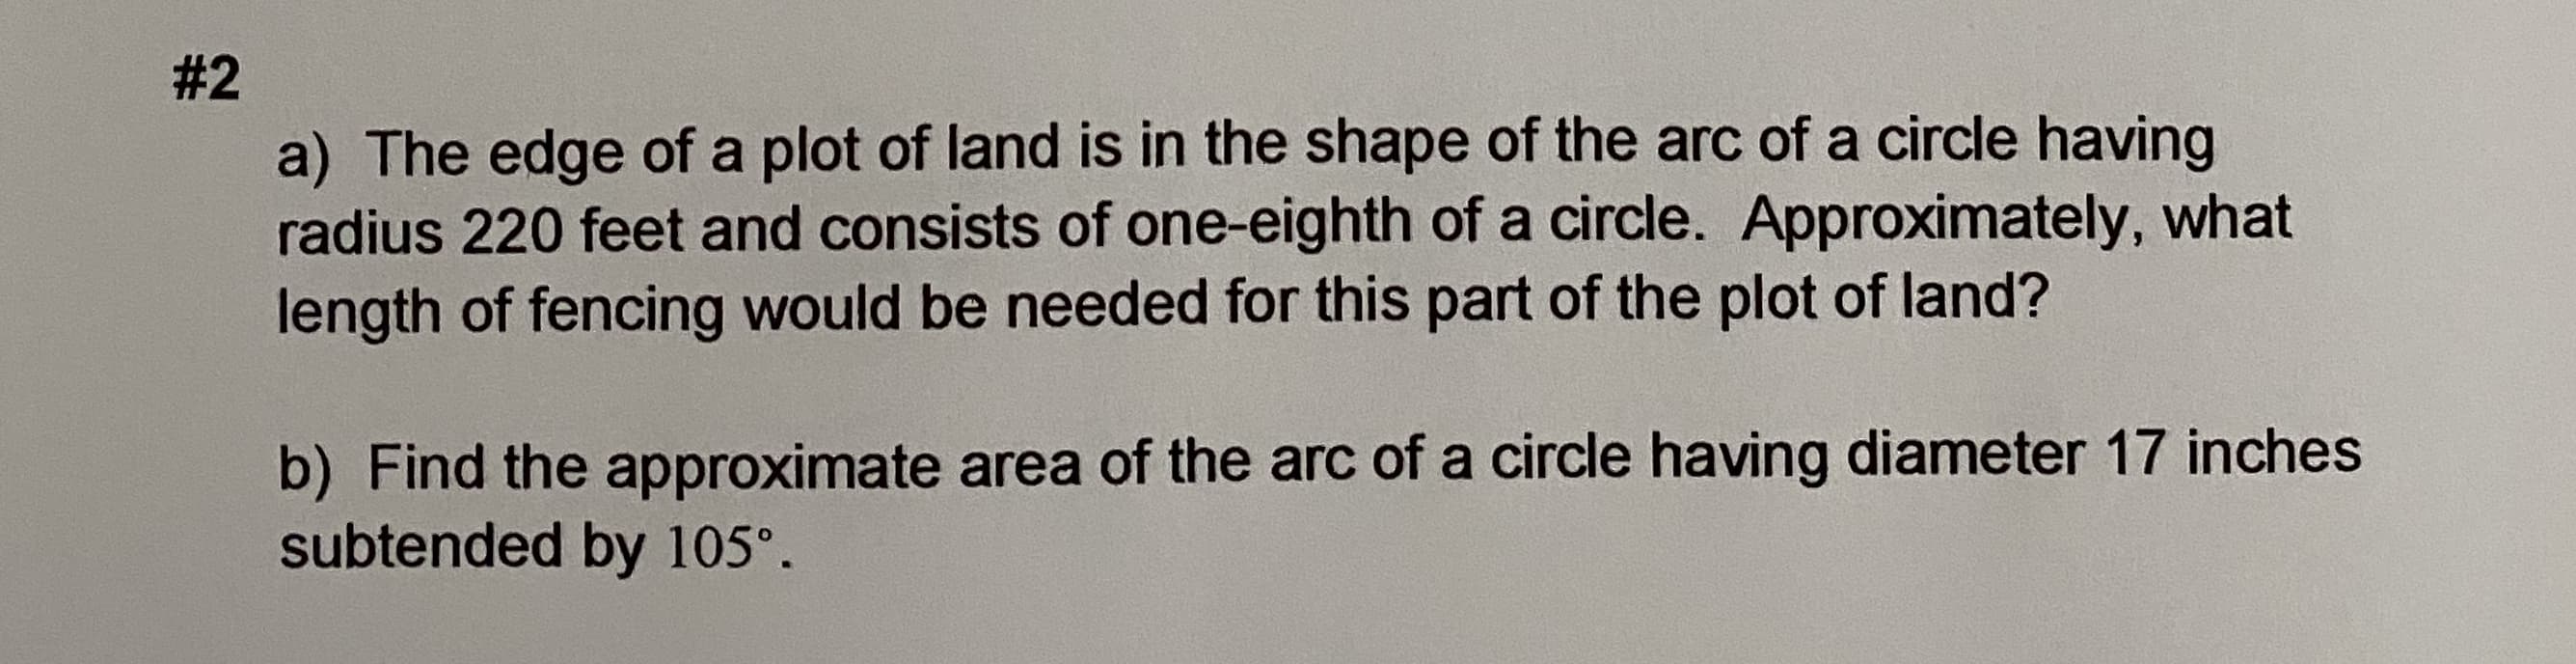 a) The edge of a plot of land is in the shape of the arc of a circle having
radius 220 feet and consists of one-eighth of a circle. Approximately, what
length of fencing would be needed for this part of the plot of land?
b) Find the approximate area of the arc of a circle having diameter 17 inches
subtended by 105°.
